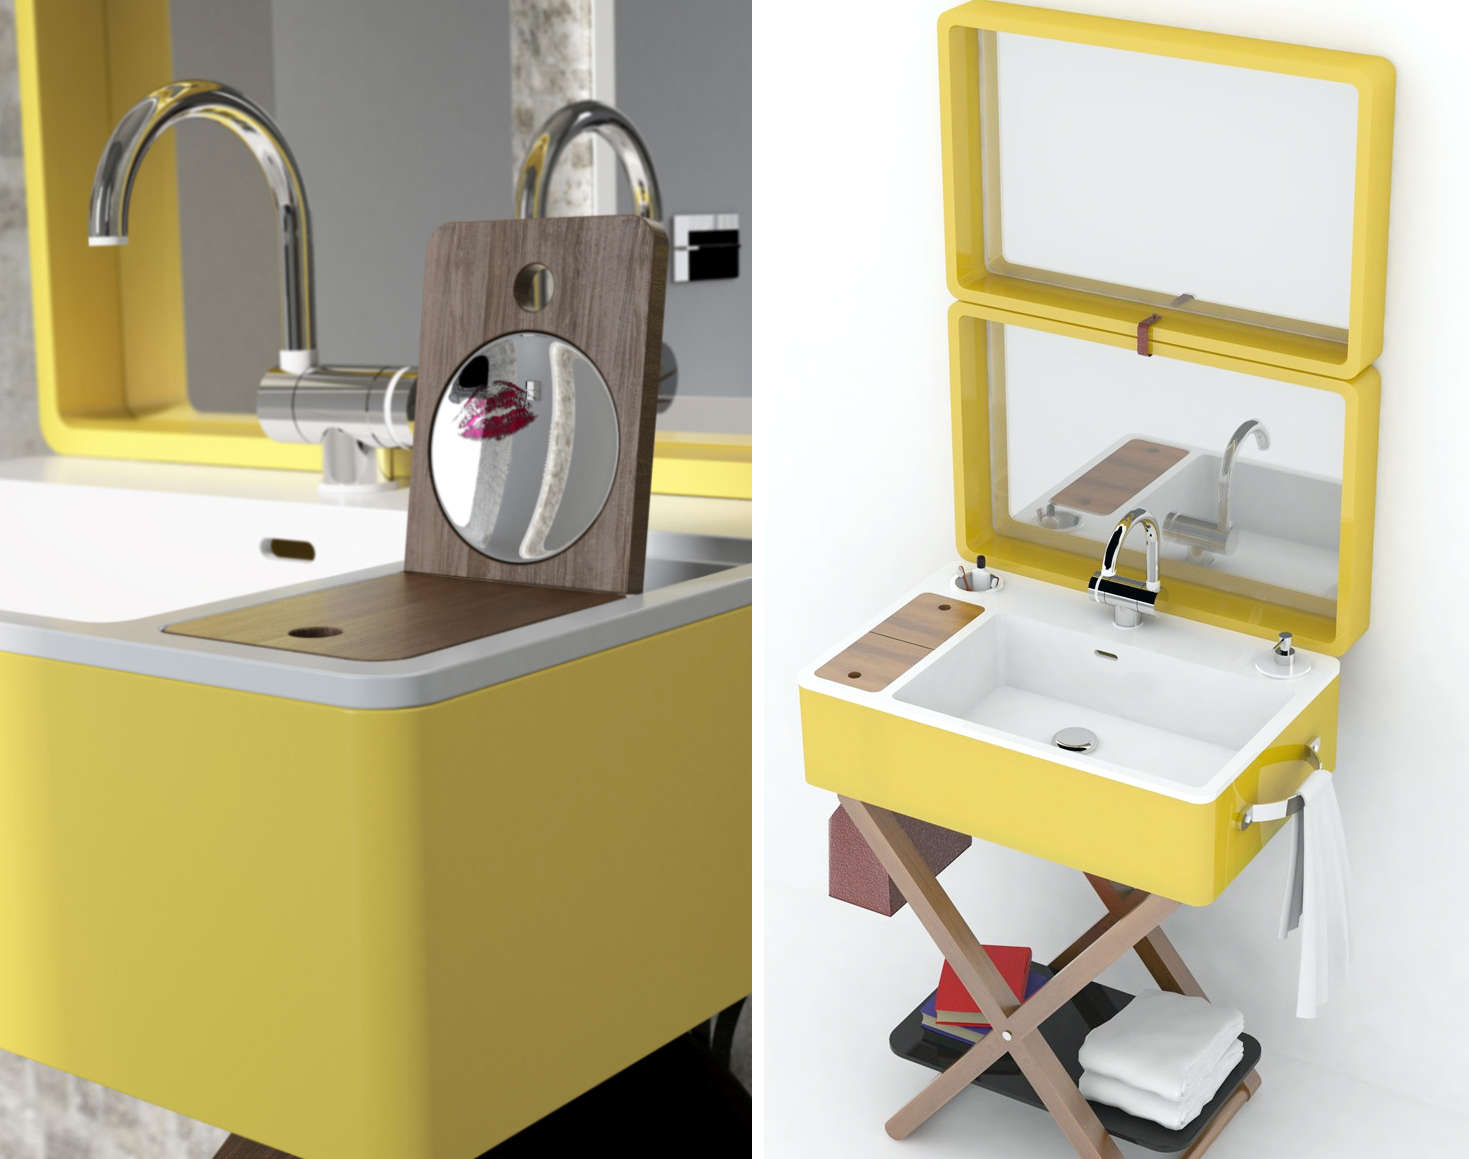 A portable vanity designed to resemble a suitcase